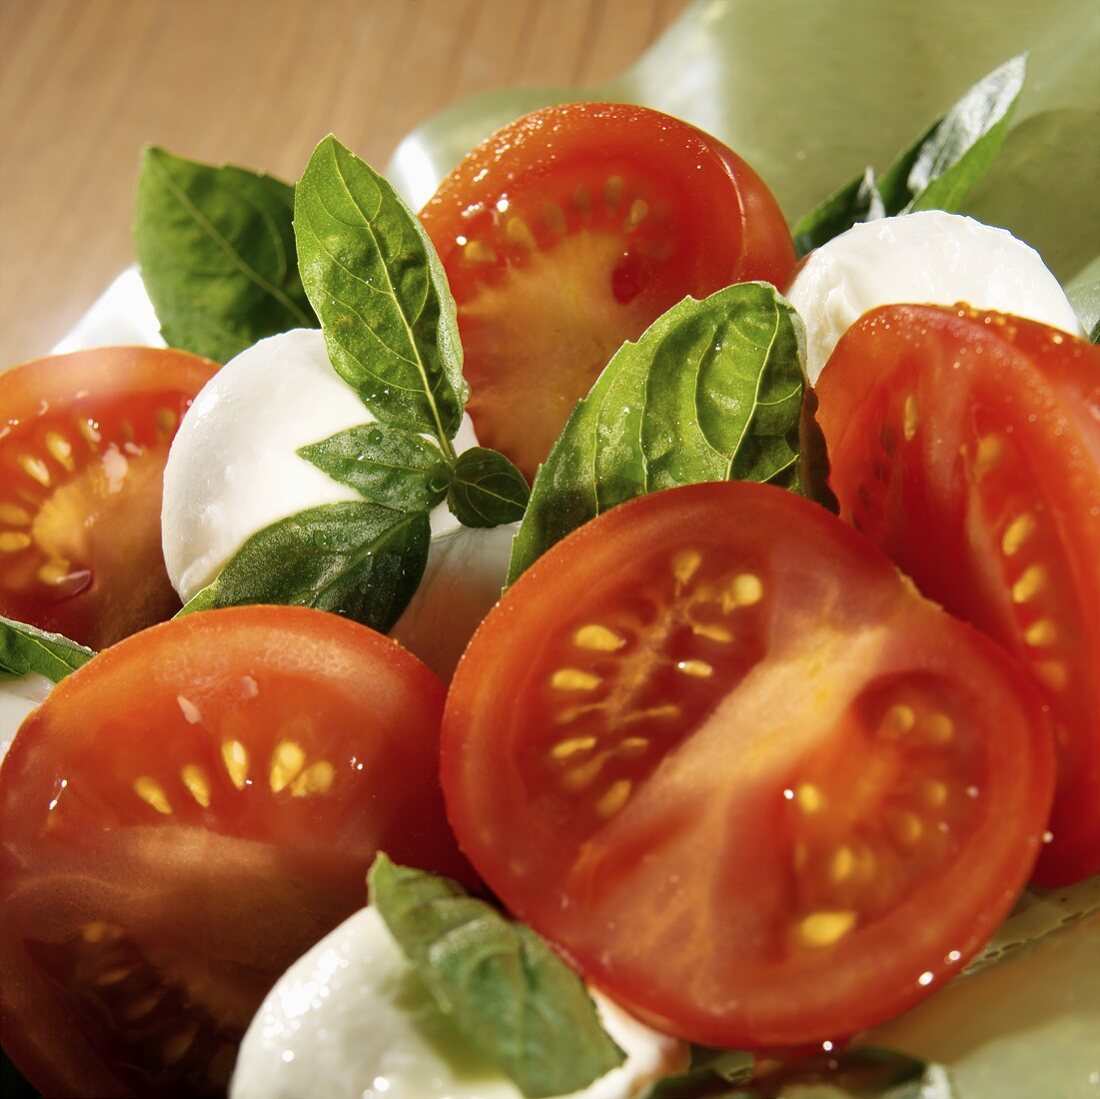 Tomatoes with mozzarella and basil (close-up)